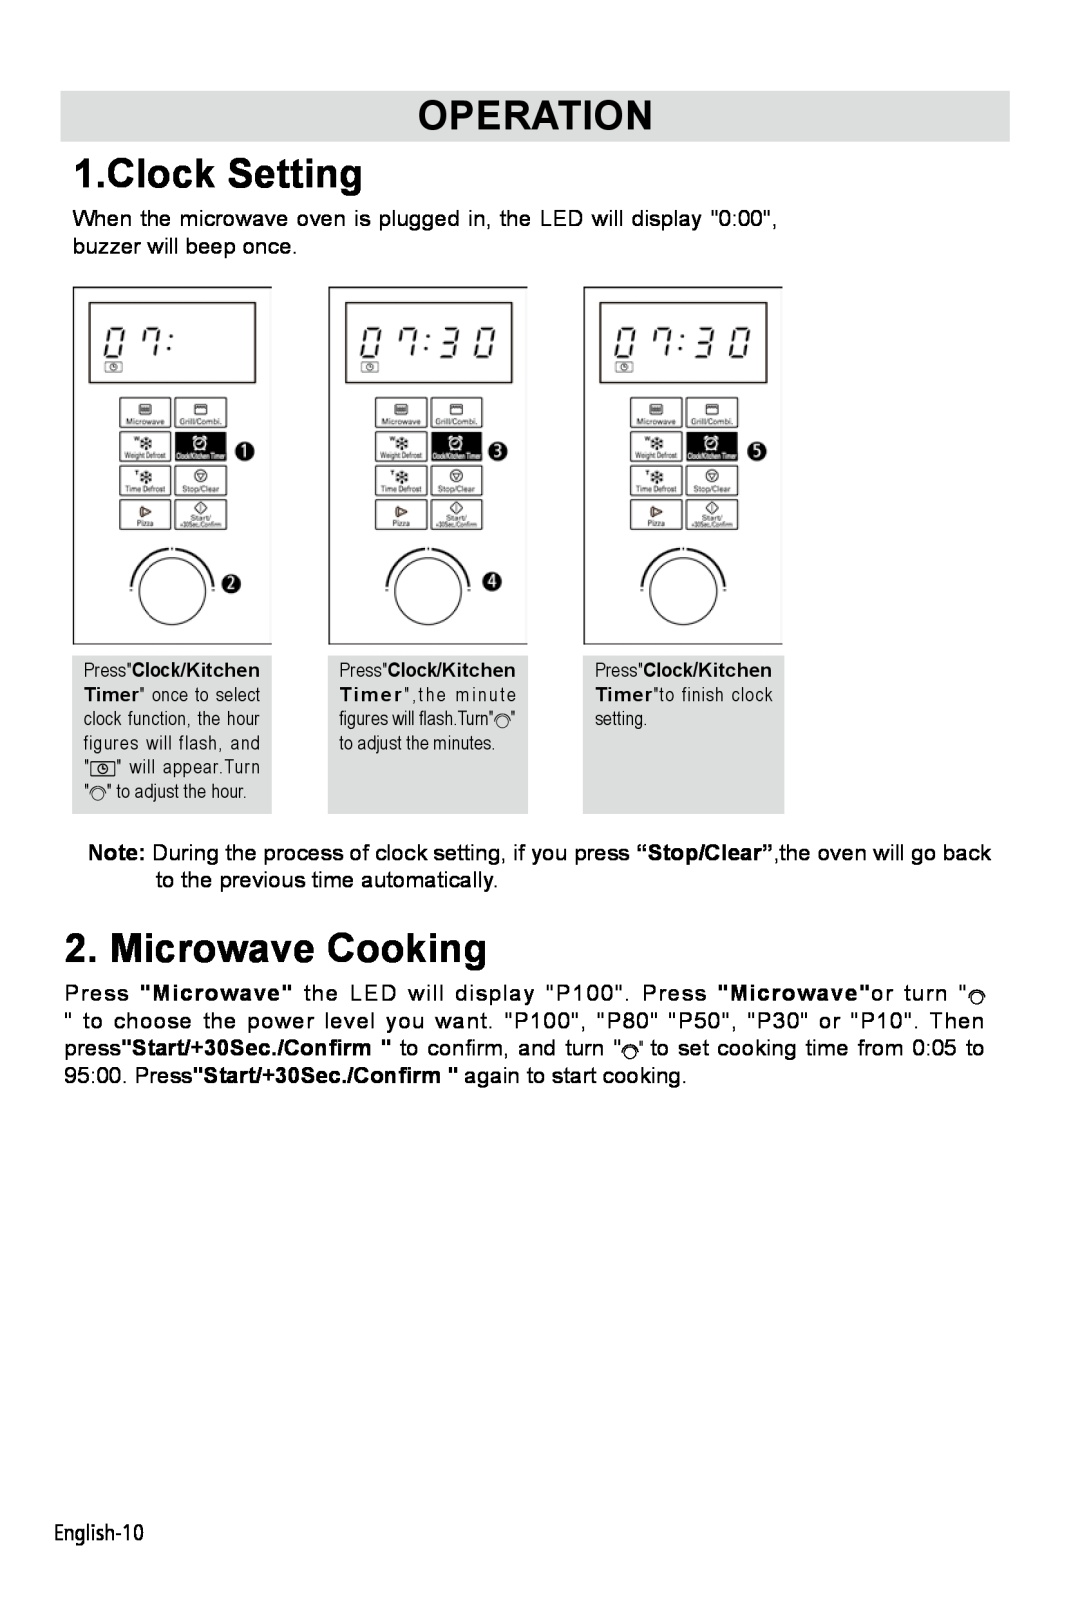 West Bend NJ 07054 instruction manual OPERATION 1.Clock Setting, Microwave Cooking 